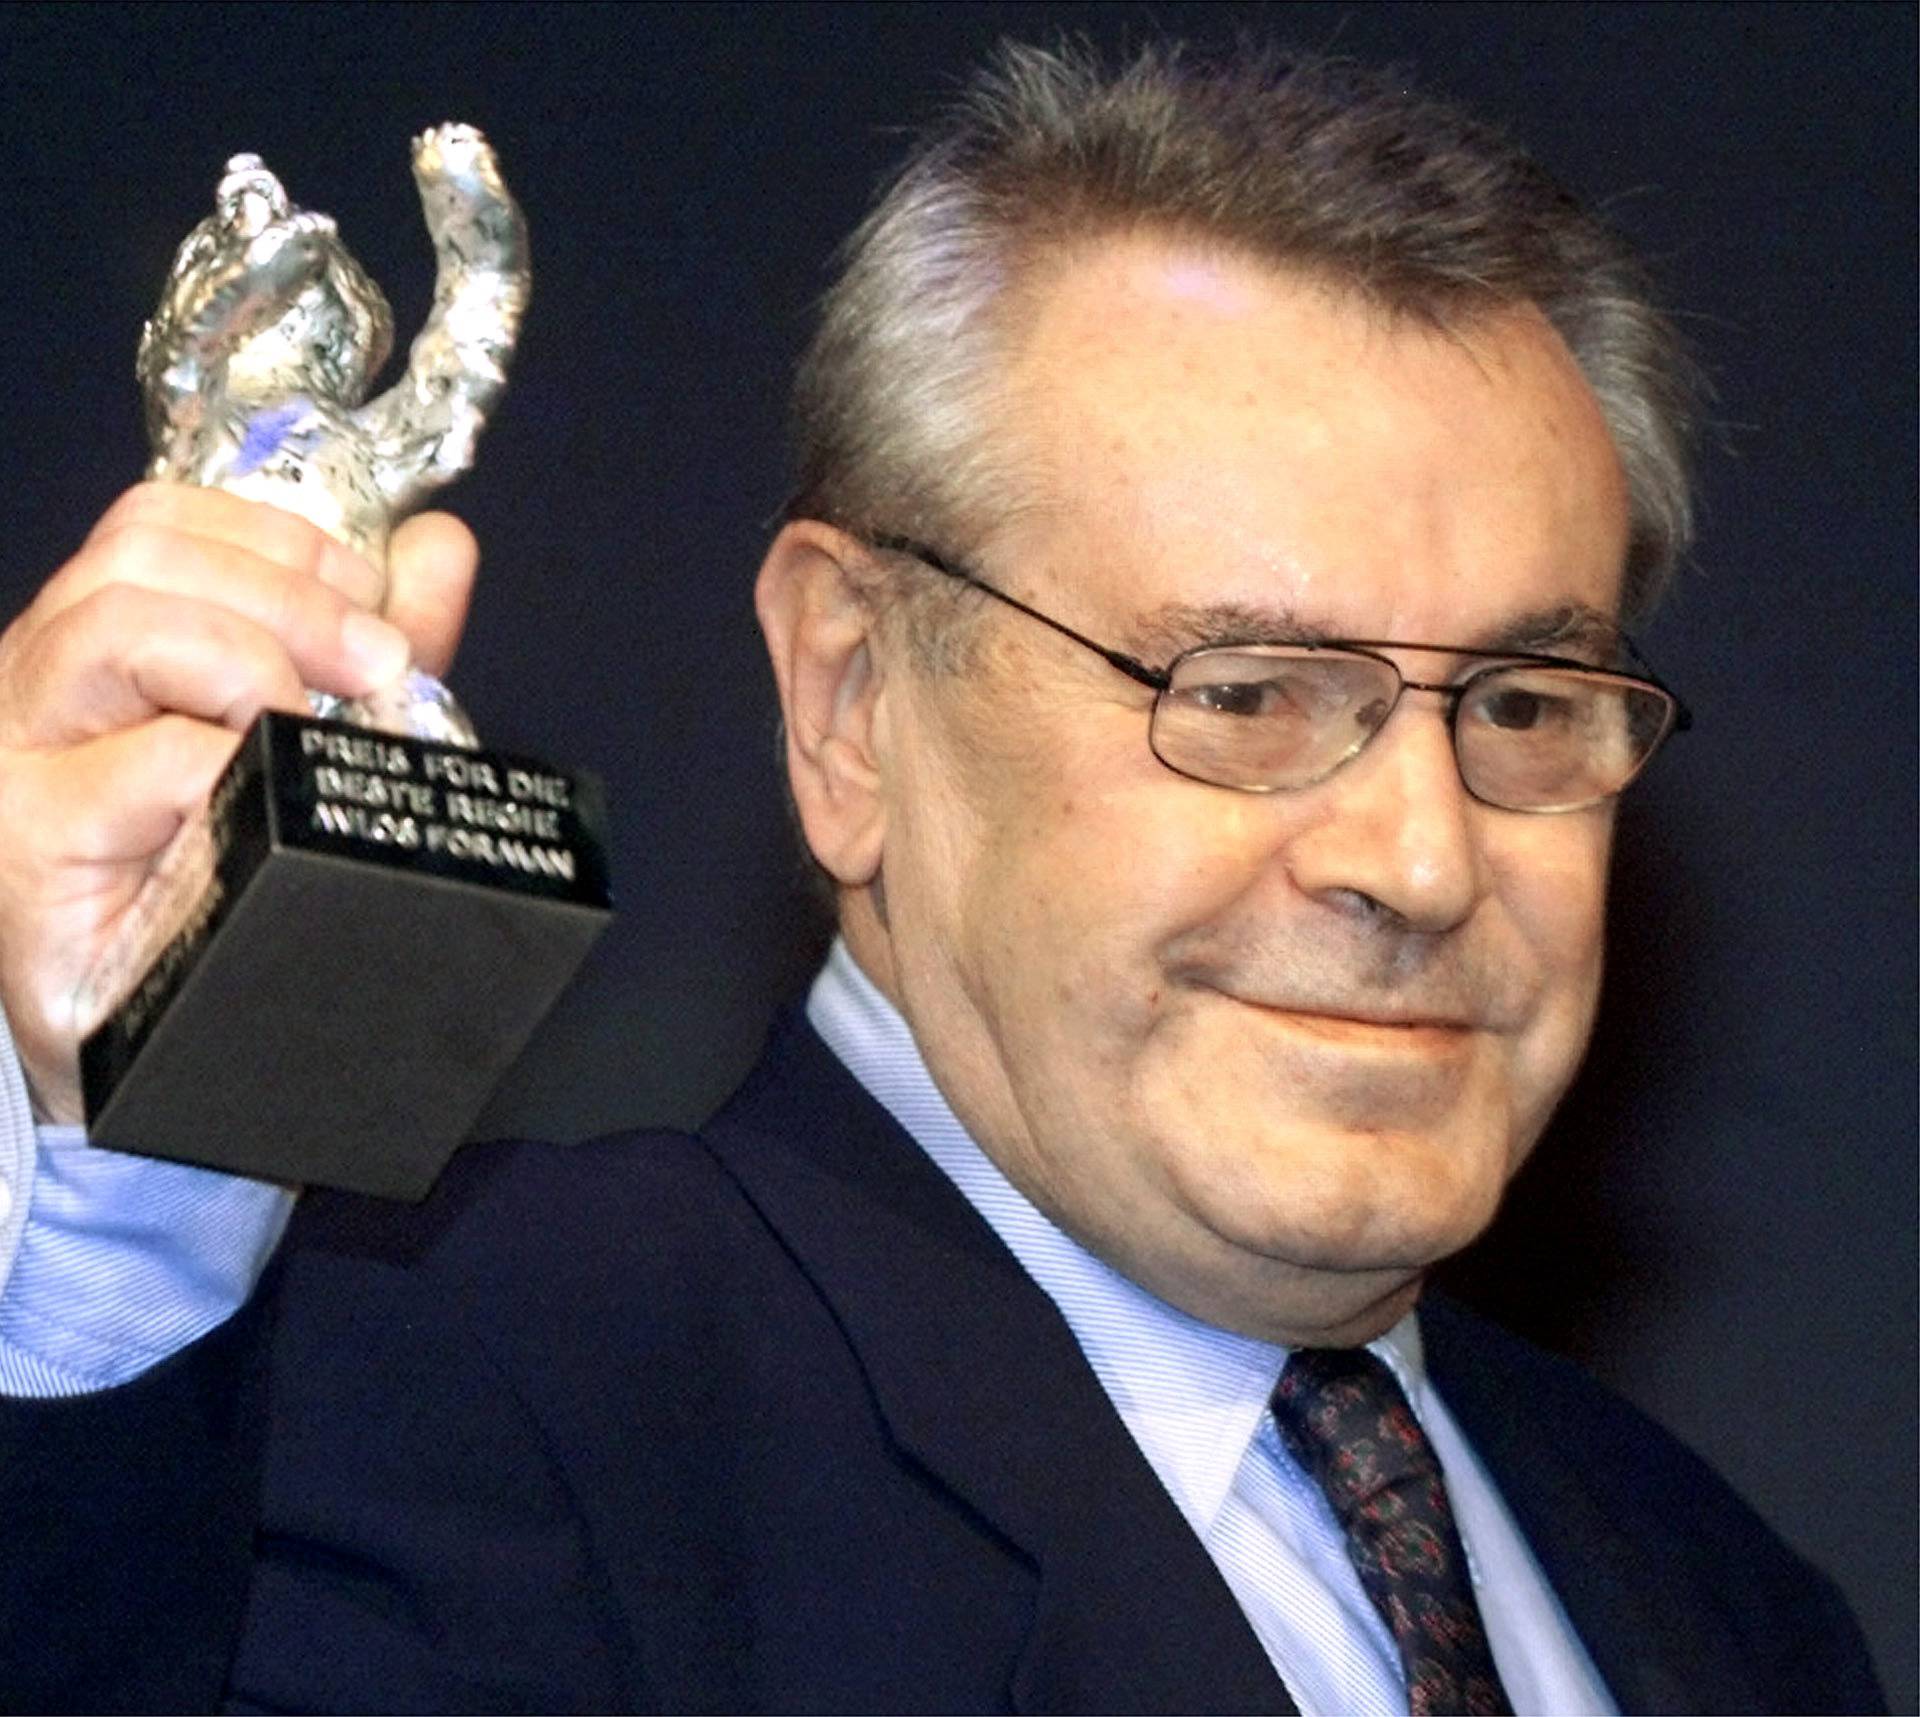 FILE PHOTO: Czech director Milos Forman holds up the Silver Bear Prize during the awarding ceremony at the 50th Berlin Film Festival in Berlin